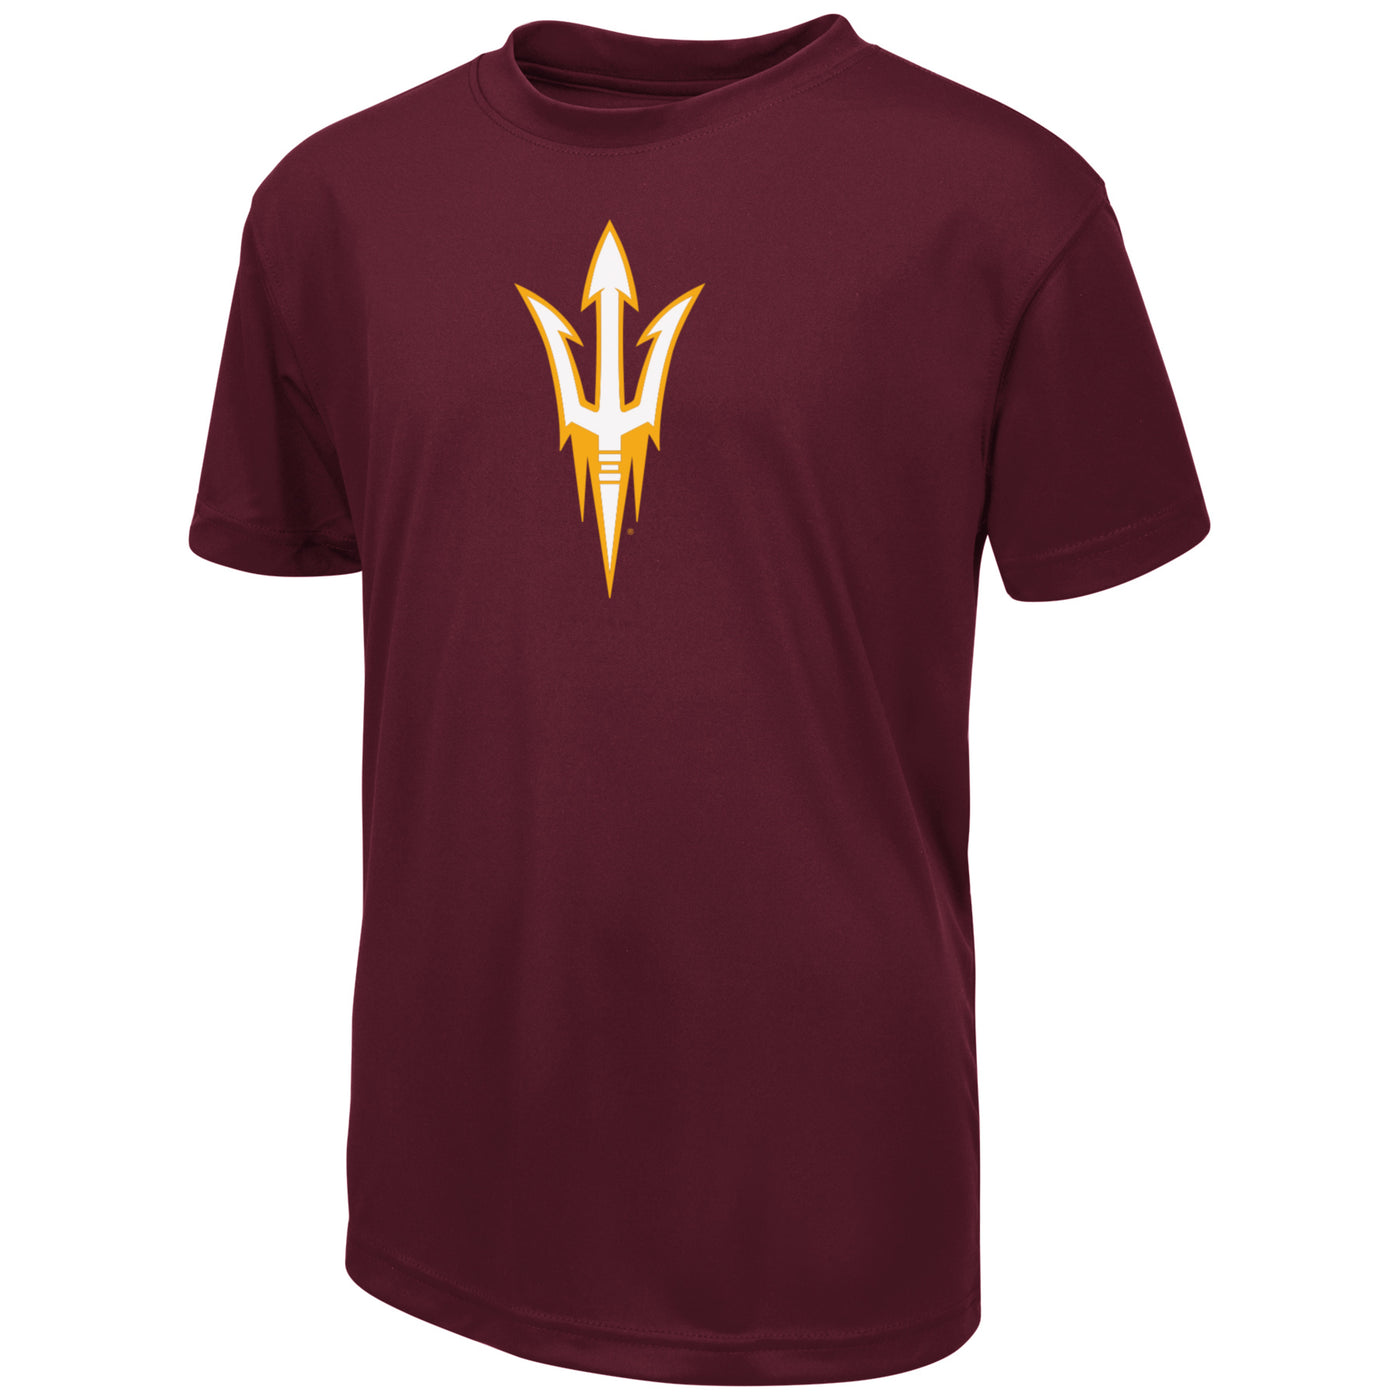 ASU maroon shirt with a gold outlined and white filled pitchfork logo. 